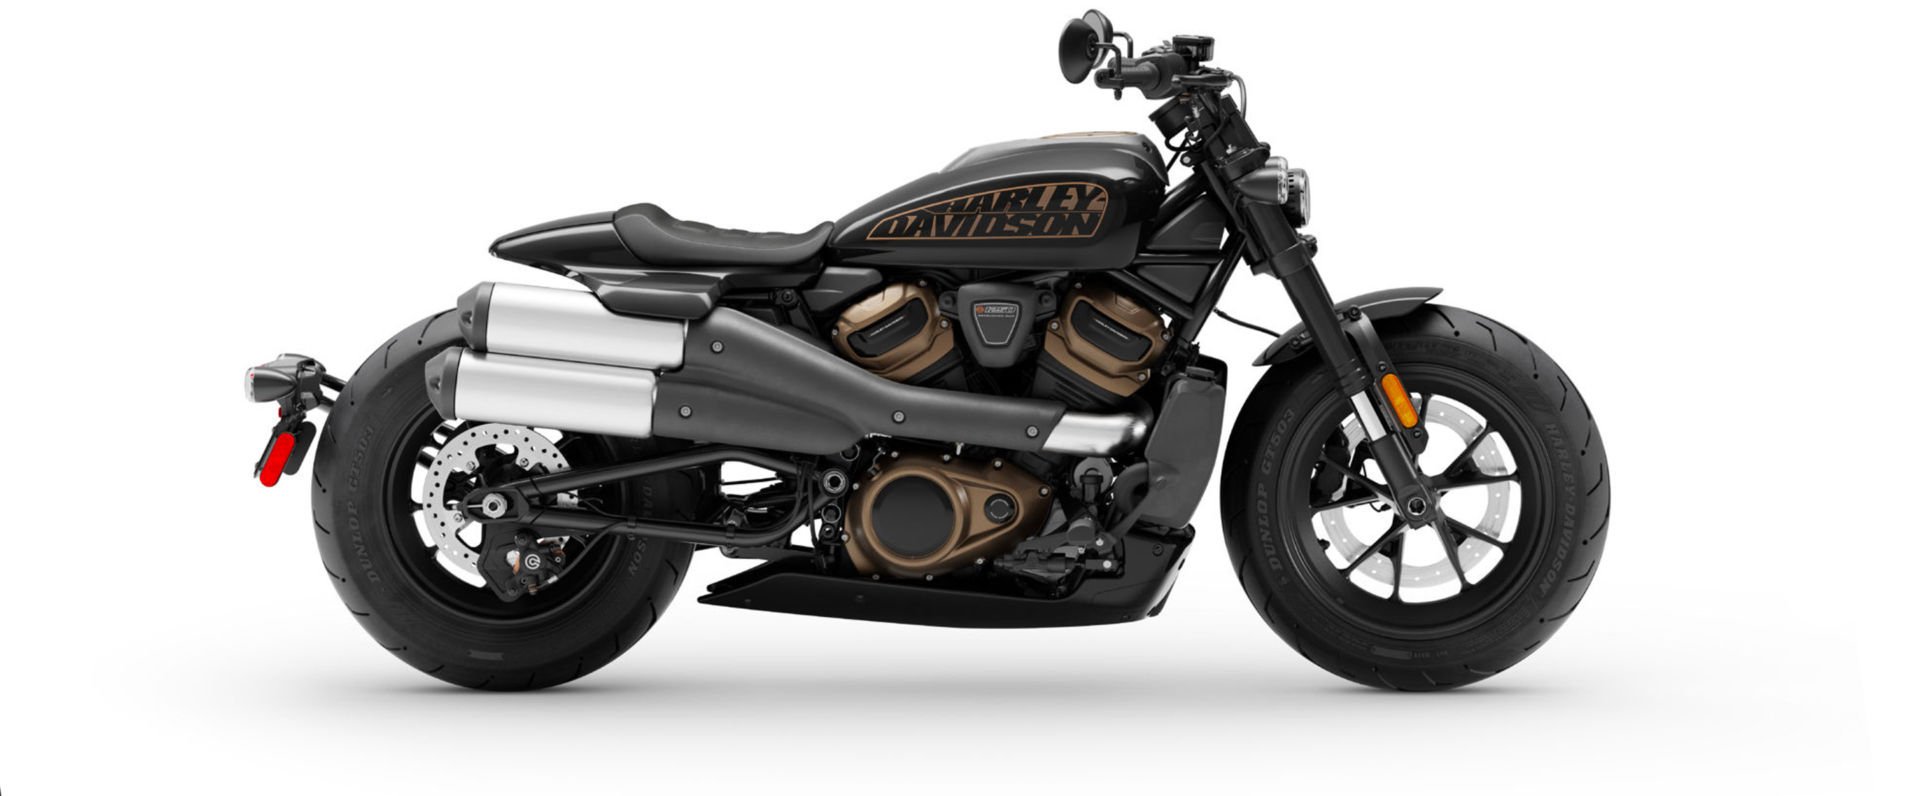 New Harley-Davidson Sportster S features Revolution Max 1250 V-Twin